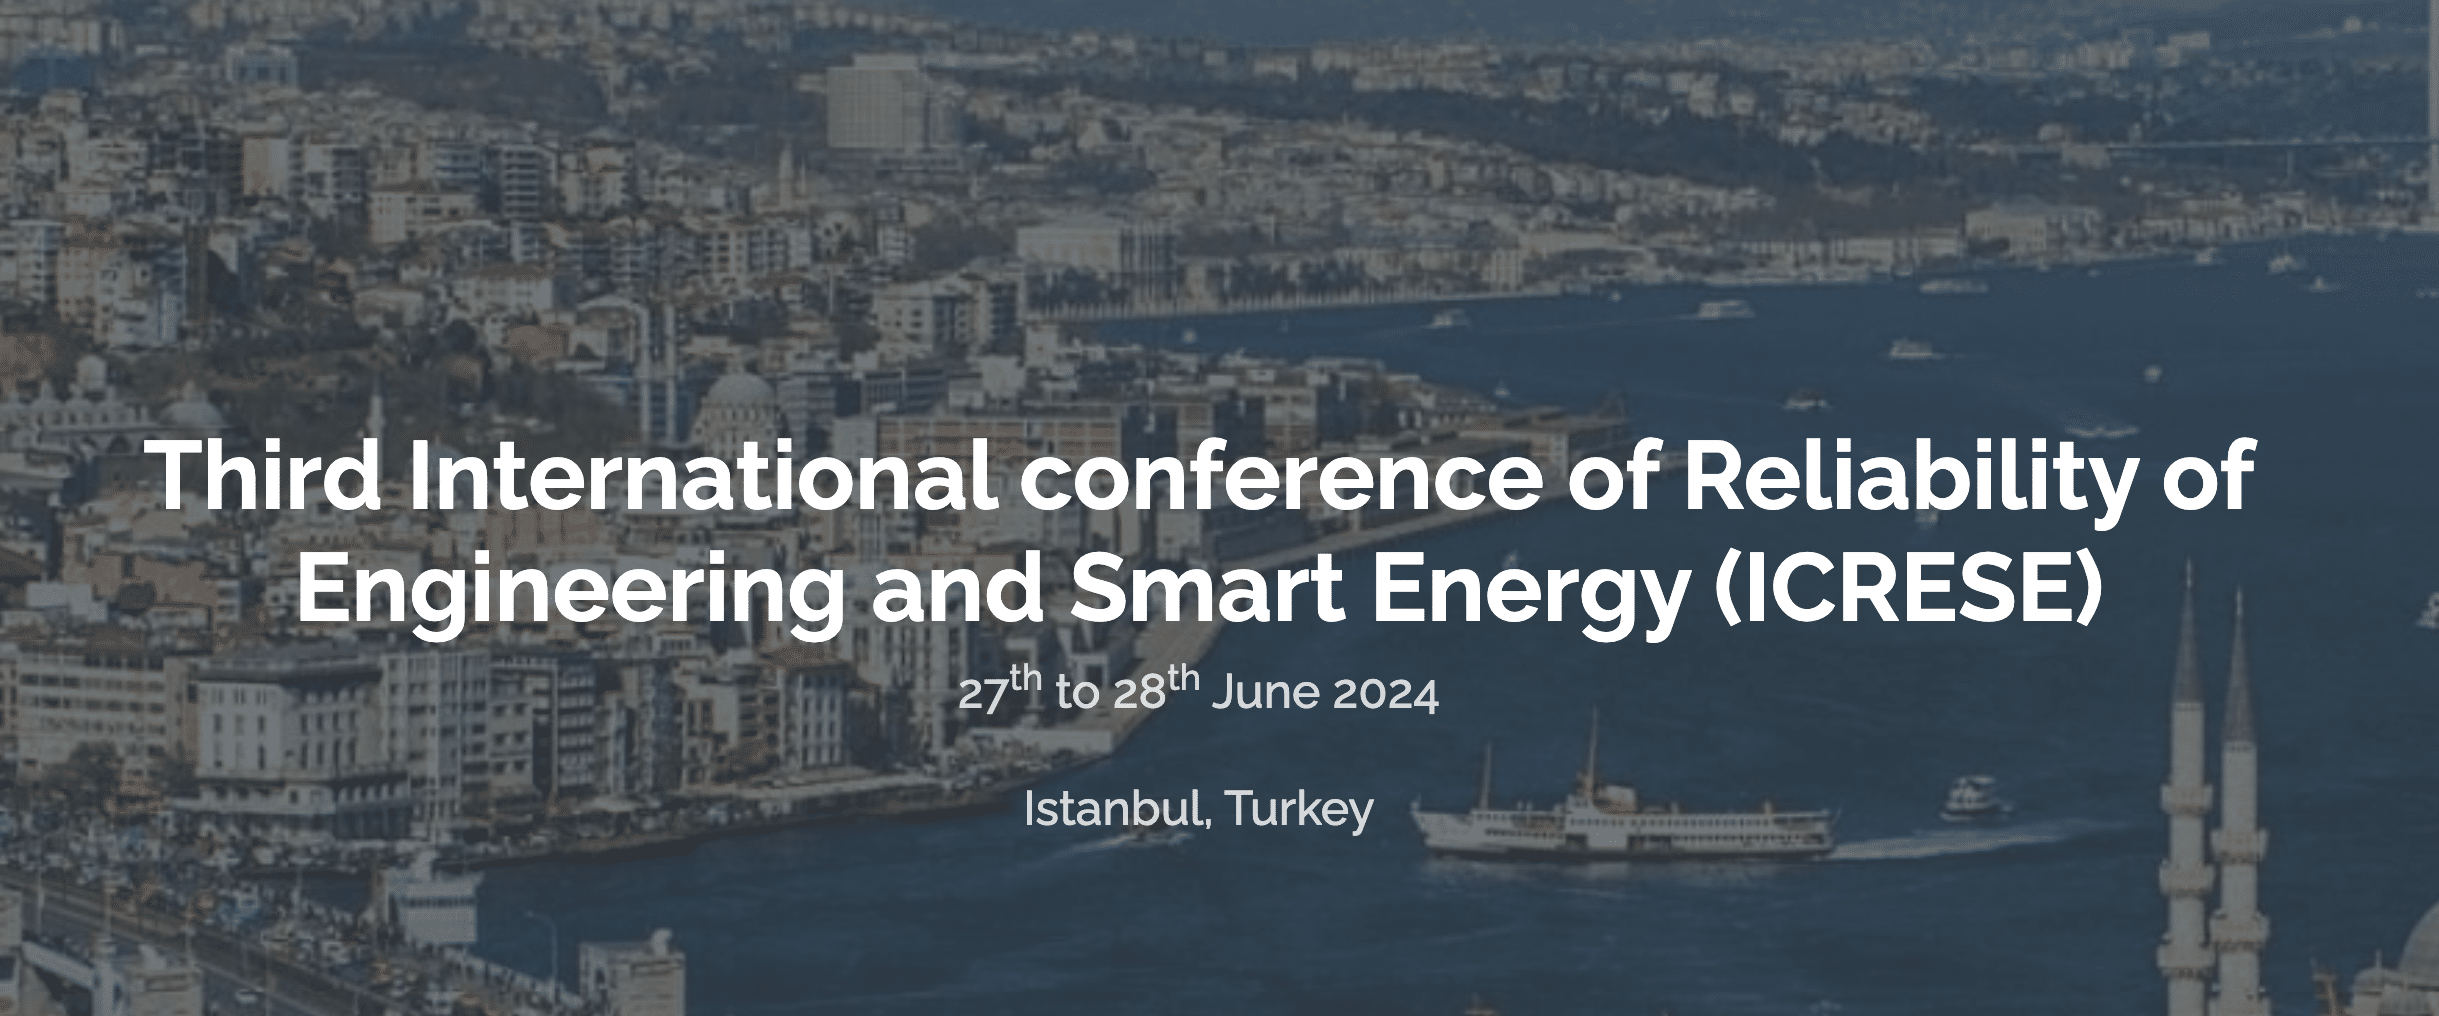 Third International conference of Reliability of Engineering and Smart Energy